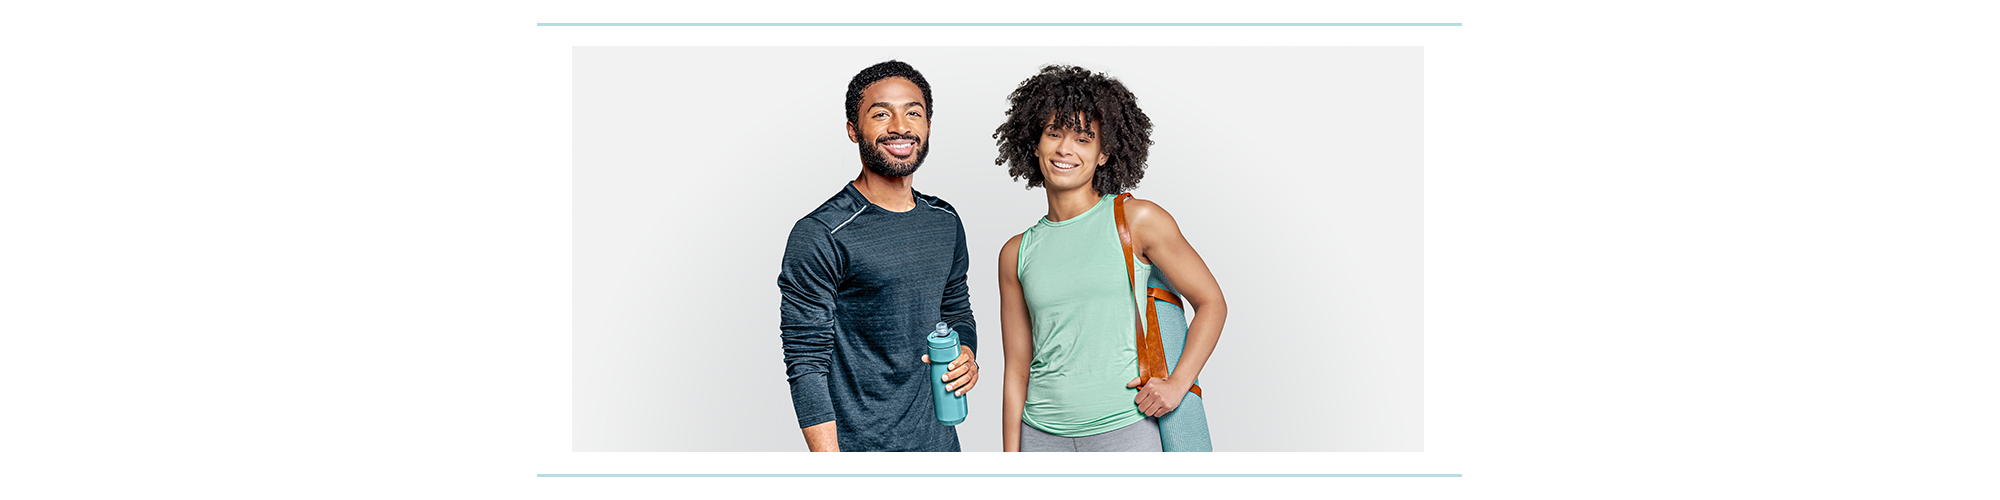 Two people wearing workout clothes and carrying workout gear.